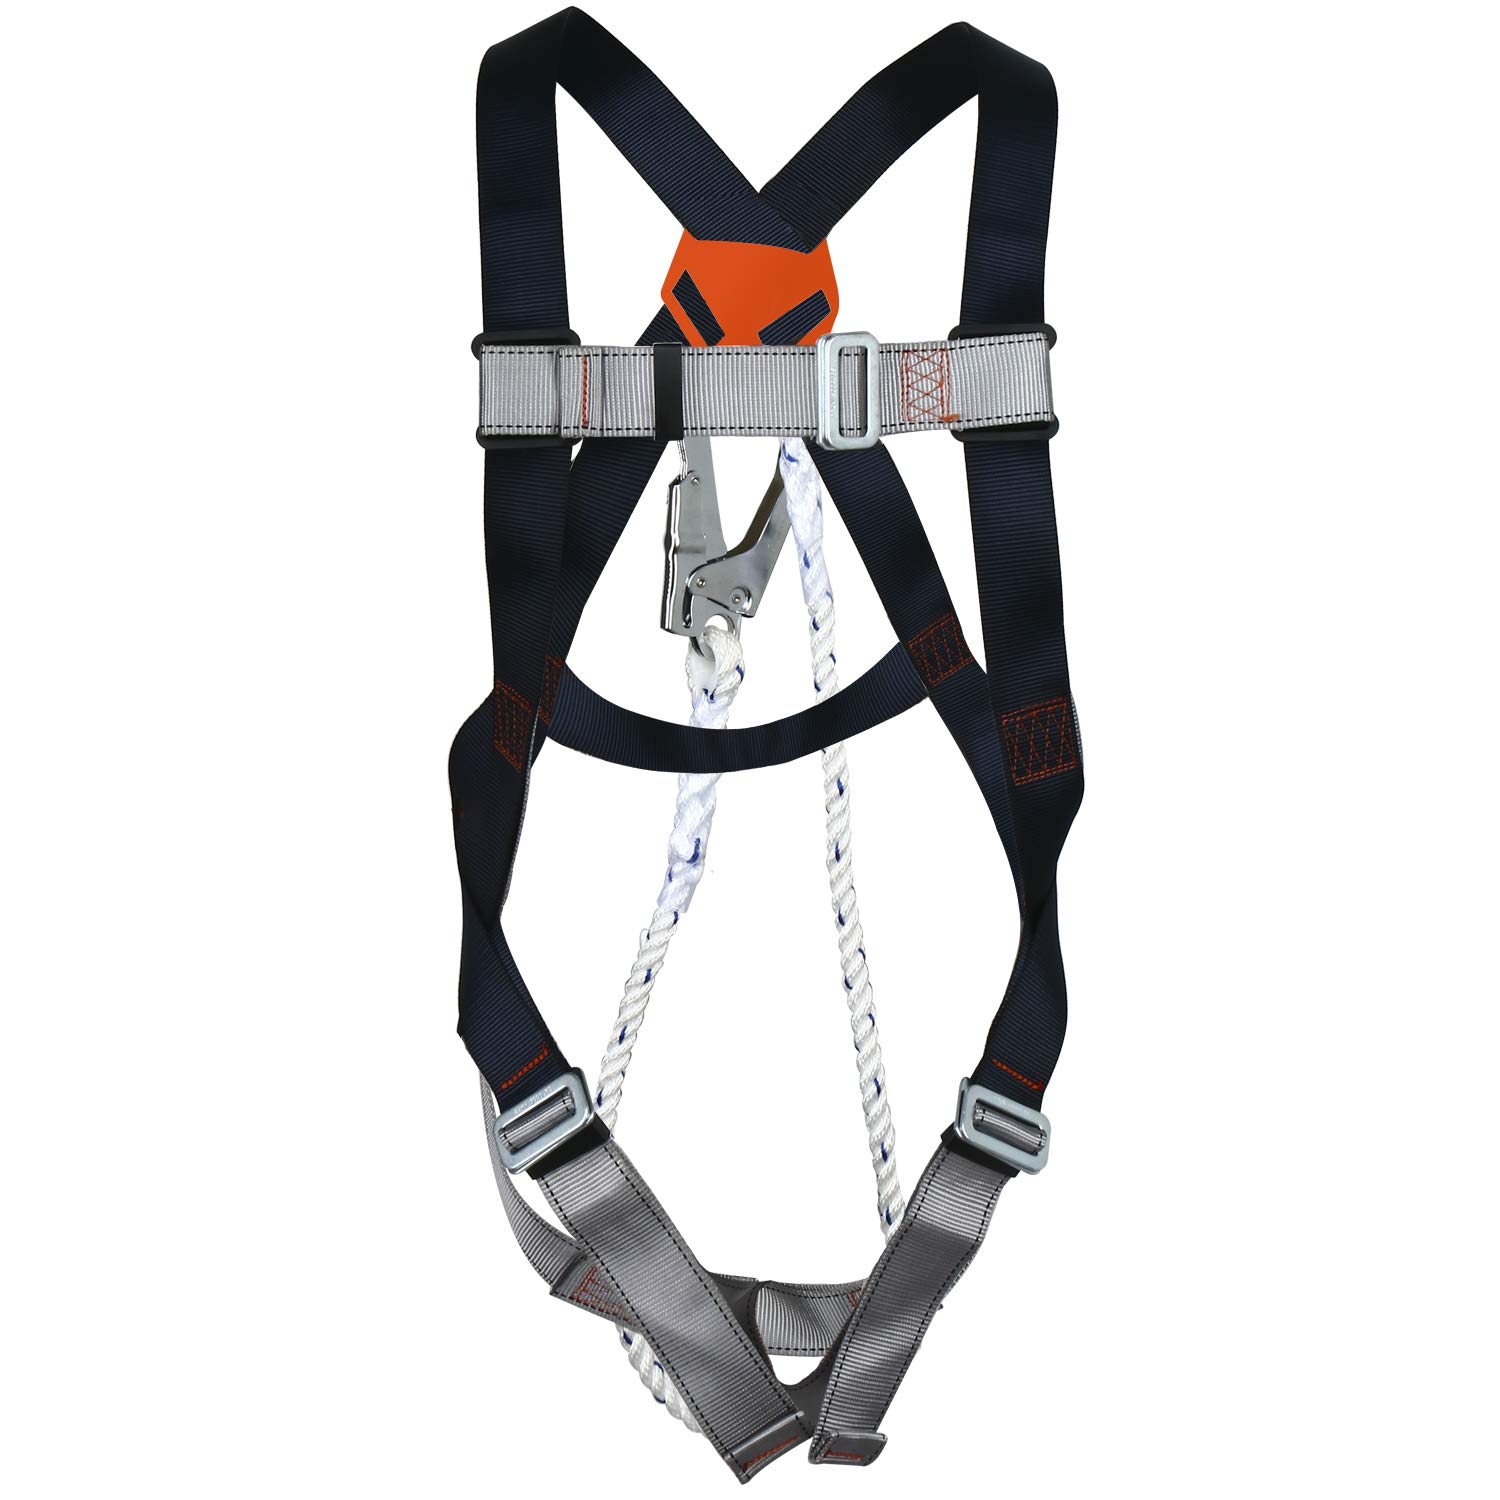 22KN Rock Climbing Fall Arrest Protection Harness Lanyard 15KN Rope Grab 